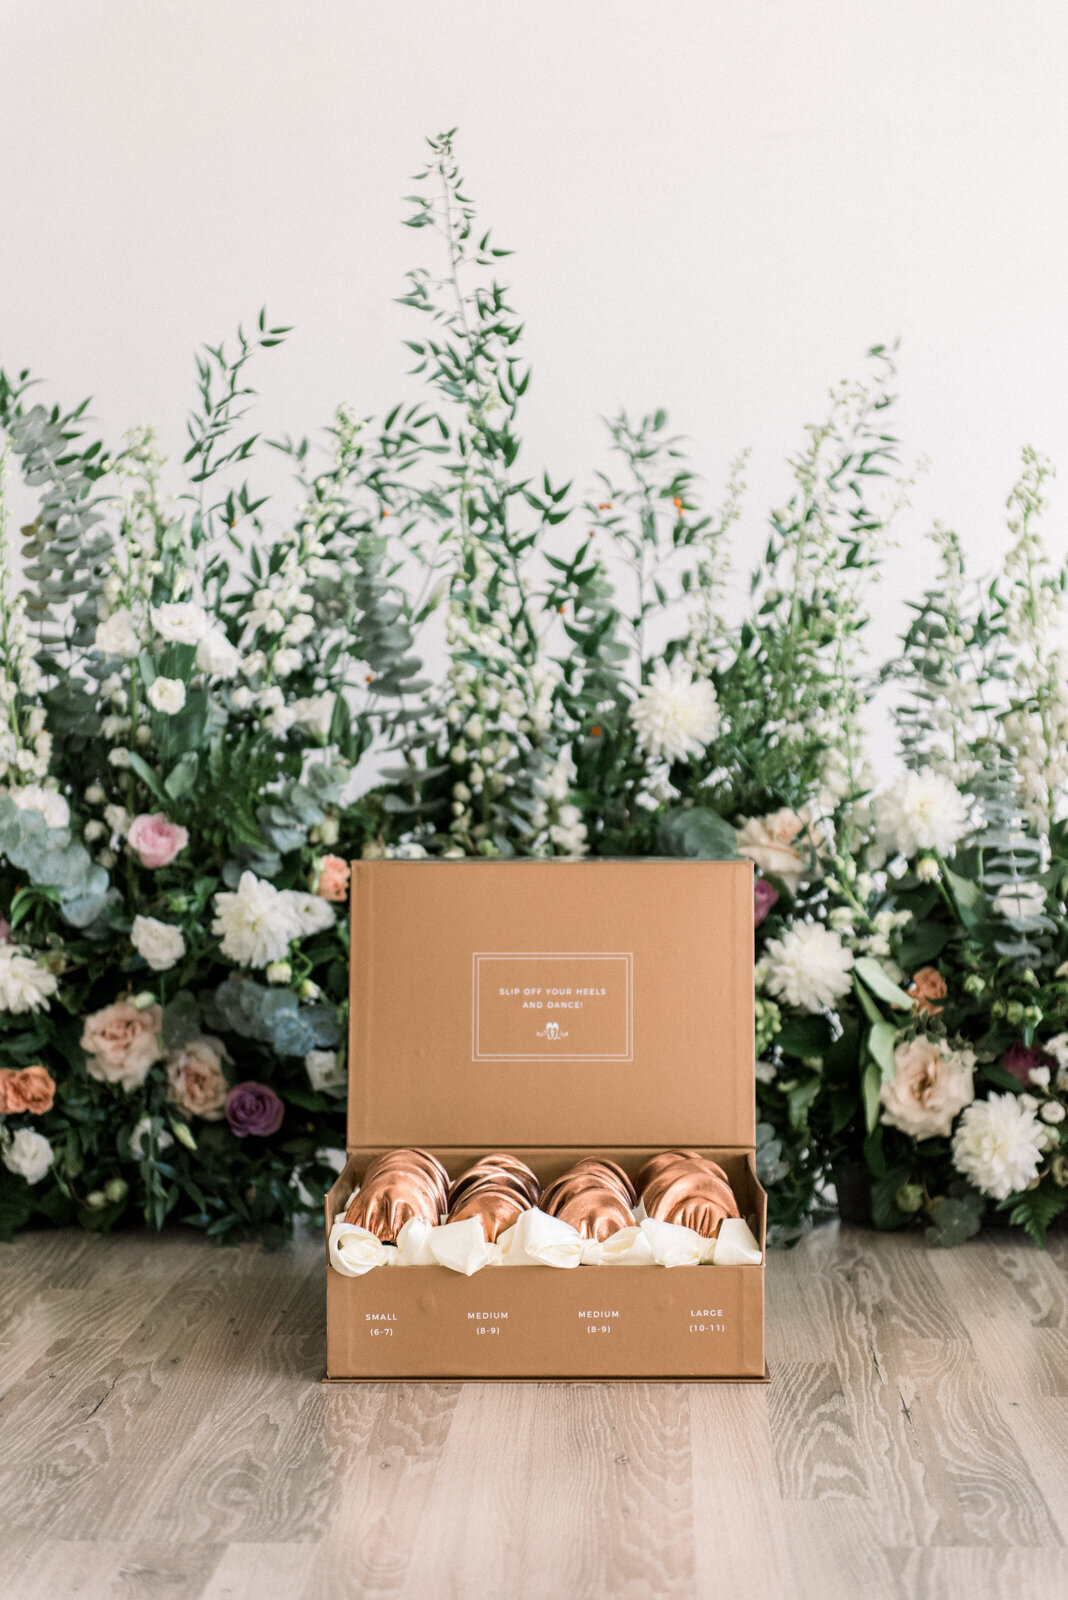 Stylish box of Rescue Flats, adorable foldable ballet flats based in Edmonton. Featured on the Brontë Bride Vendor Guide.